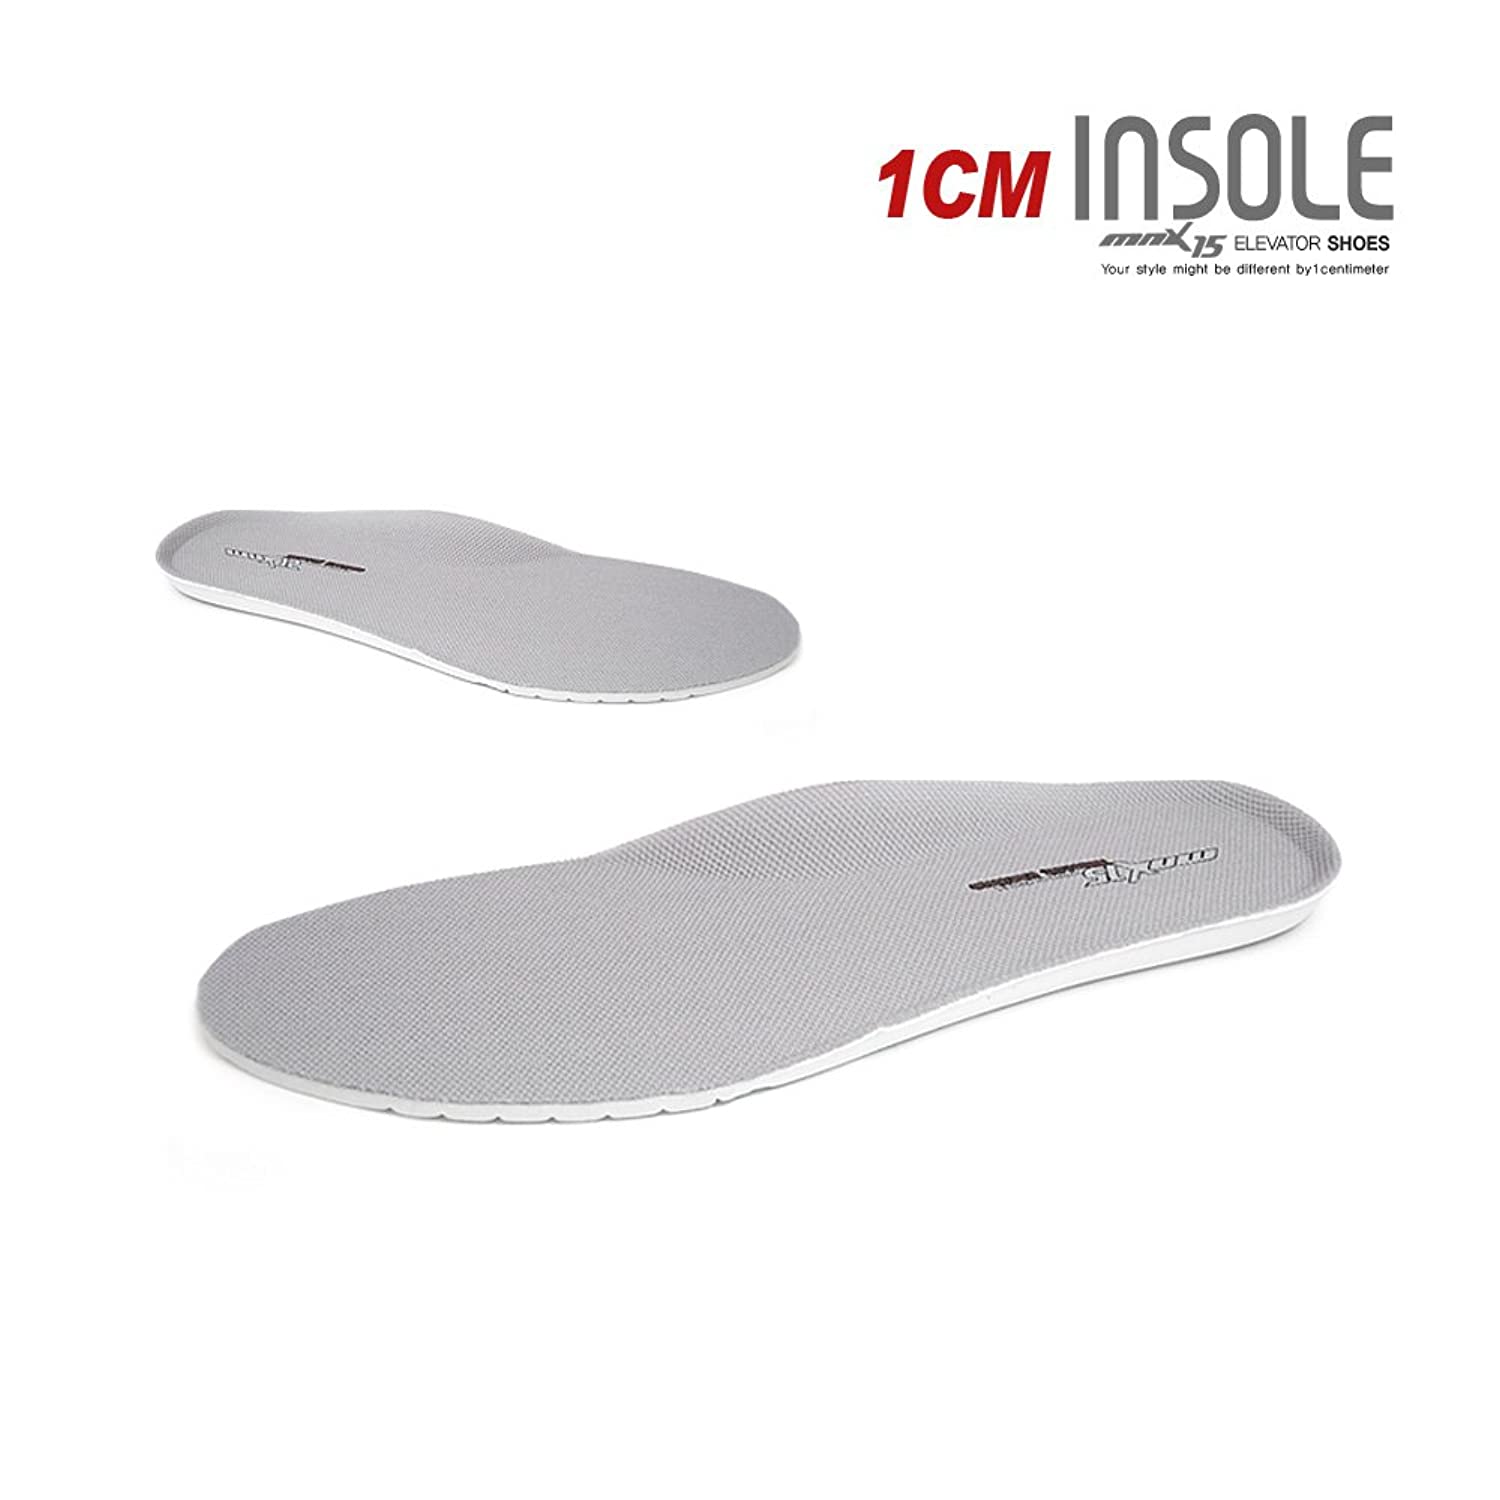 TOP14：MNX15 1cm insole シークレットインソール 中敷